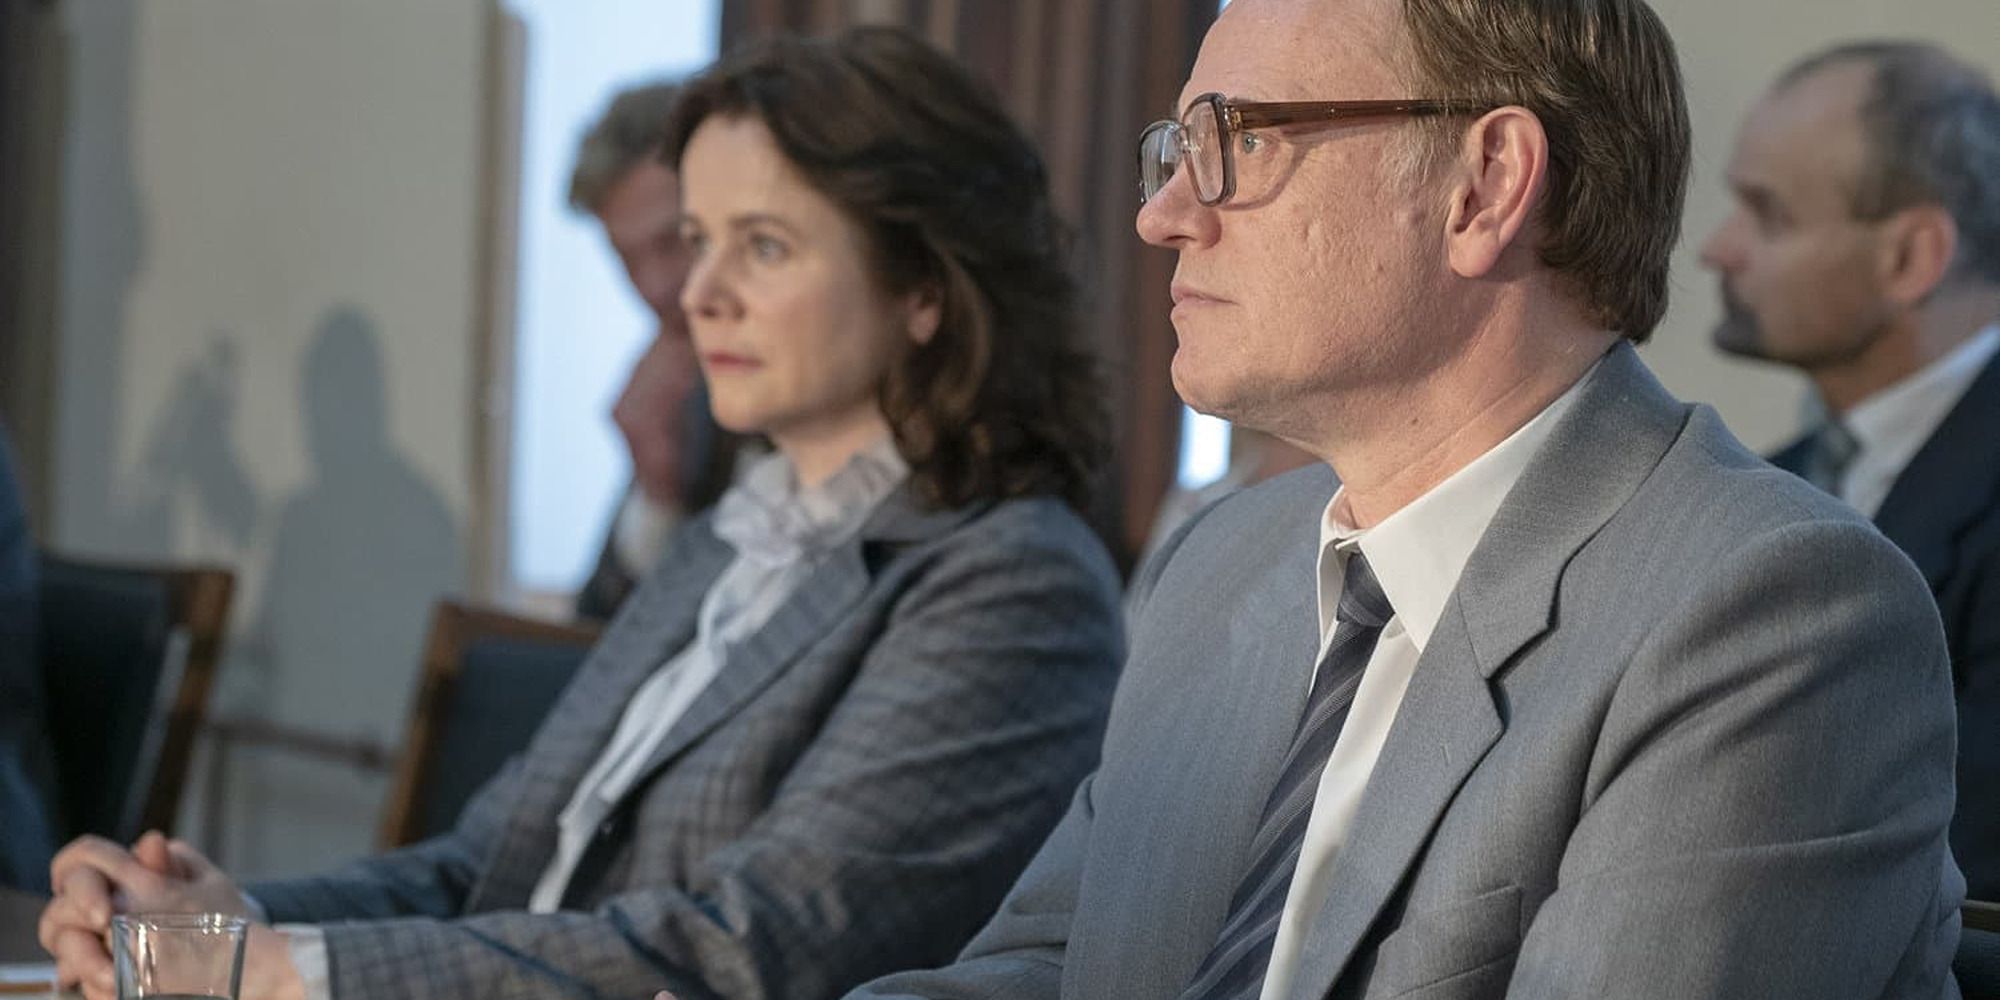 Jared Harris and Emily Watson in costume sit at a table from Chernobyl.